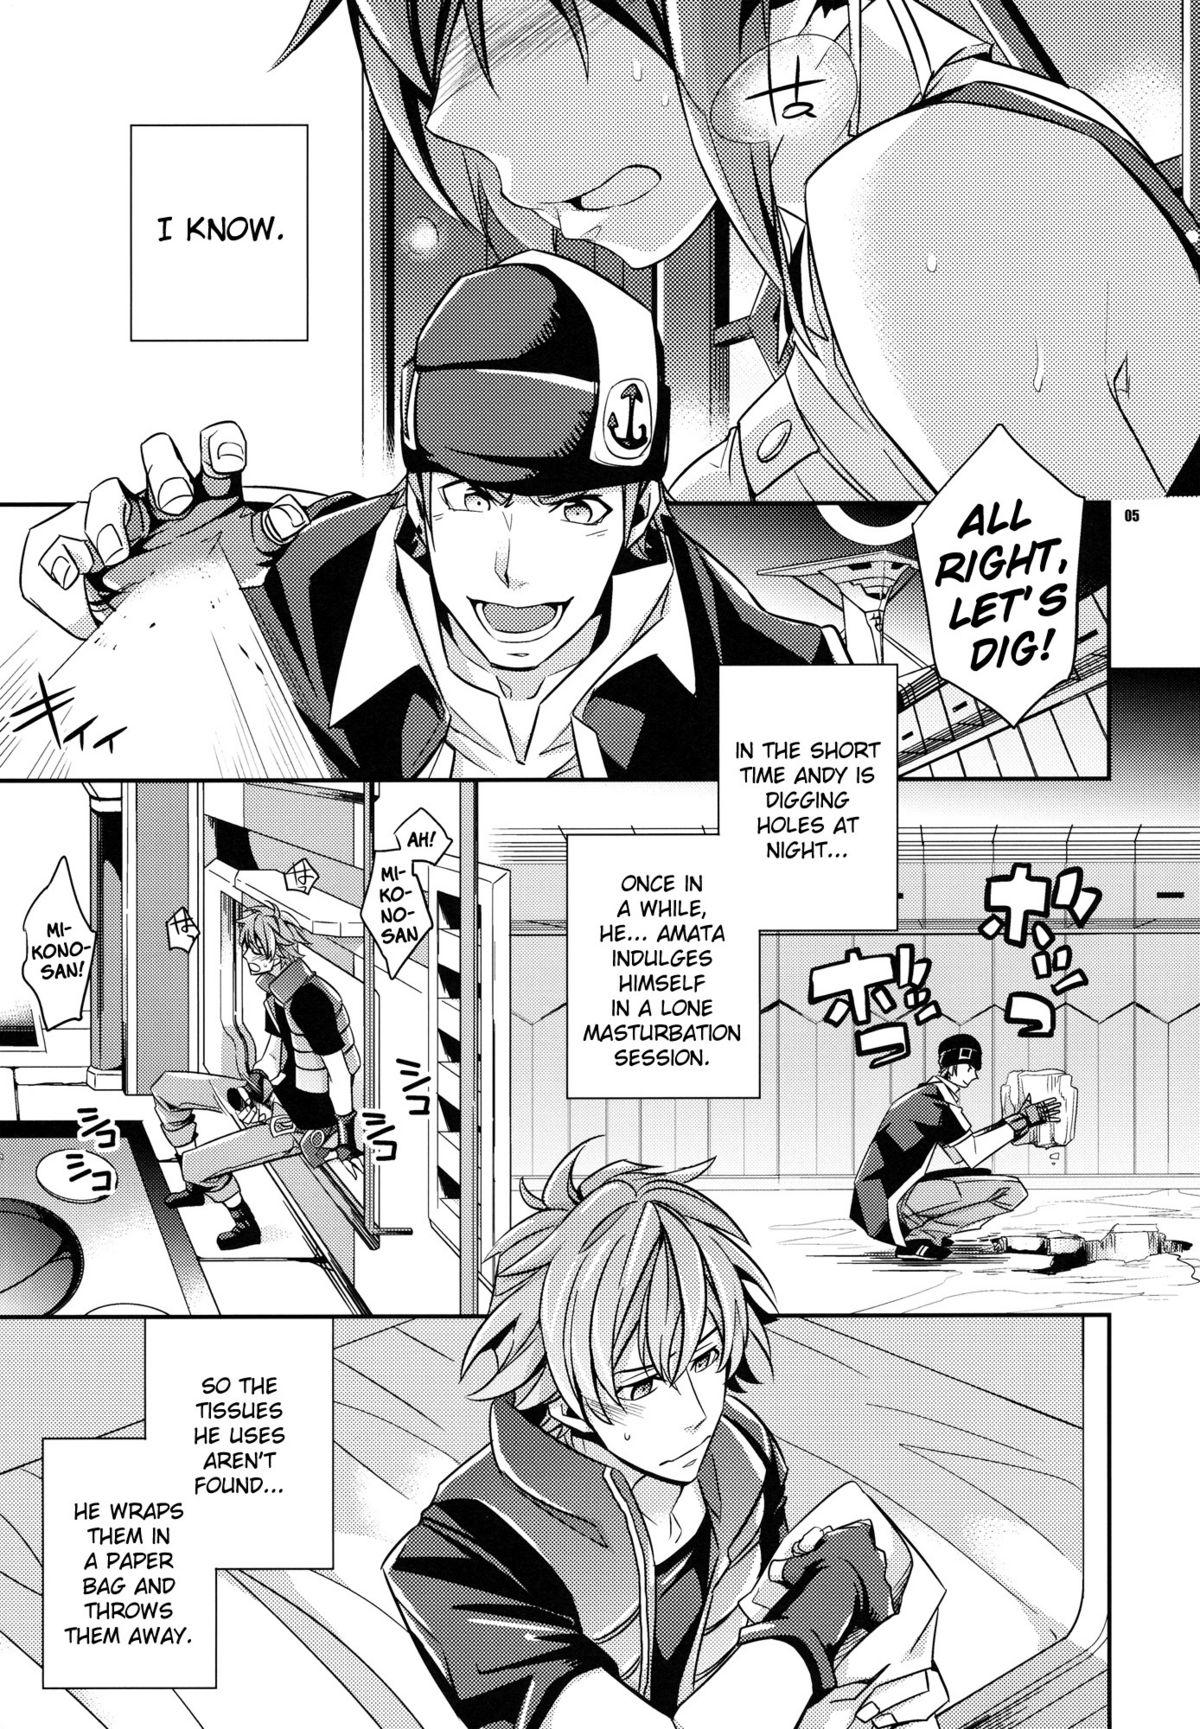 Fucked Hard Zessica no Koufukuron | Zessica's Theory of Happiness - Aquarion evol Roludo - Page 3